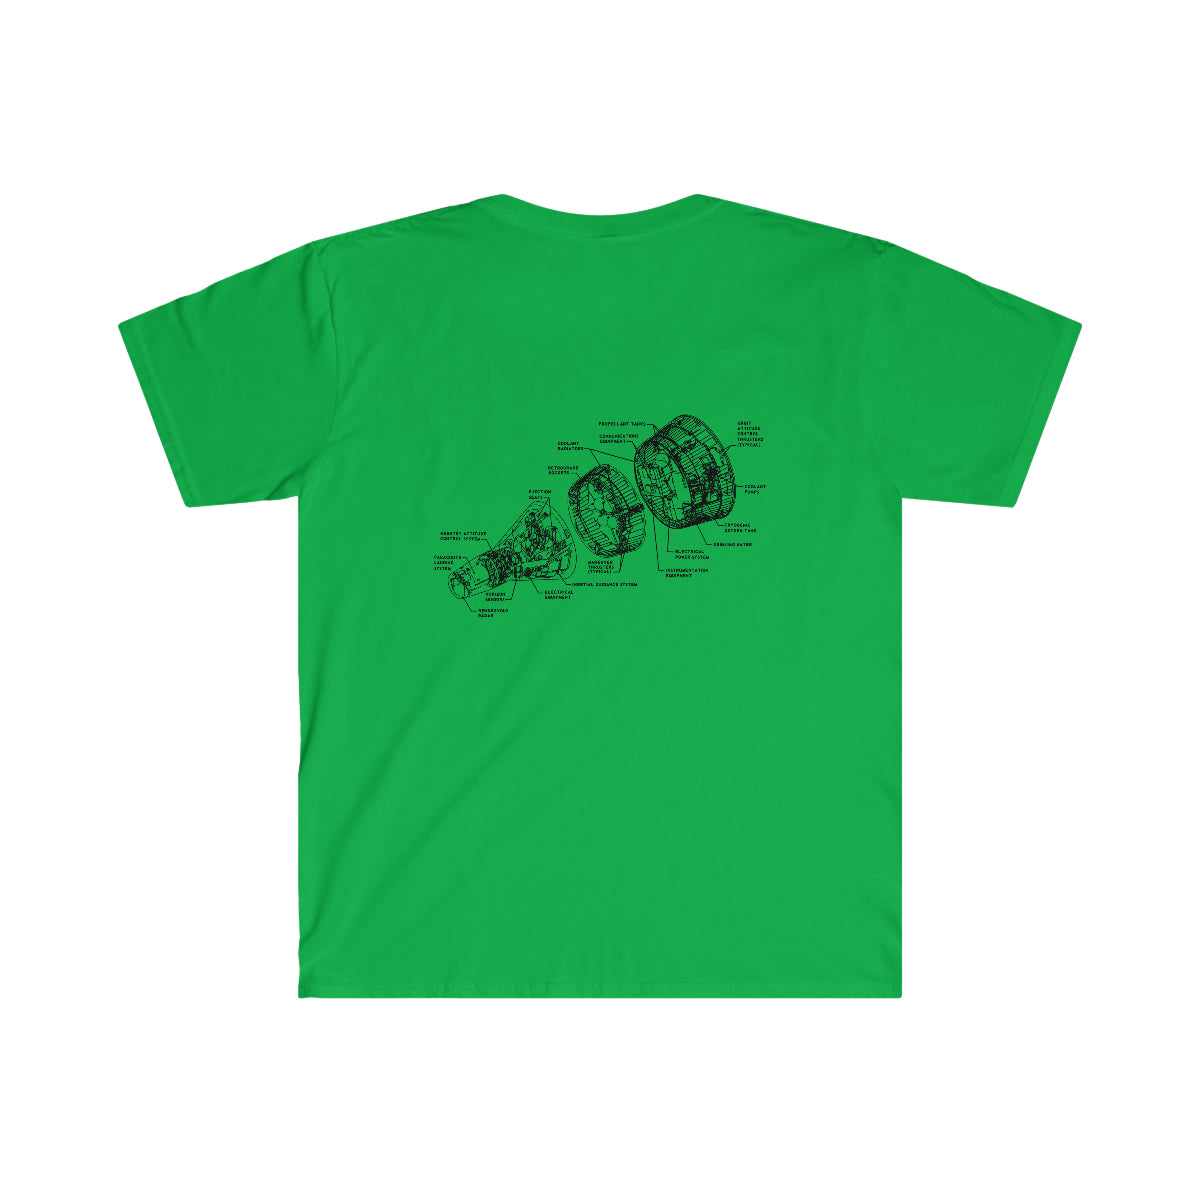 A green Stages of Landing T-Shirt with a printed image of a car engine.